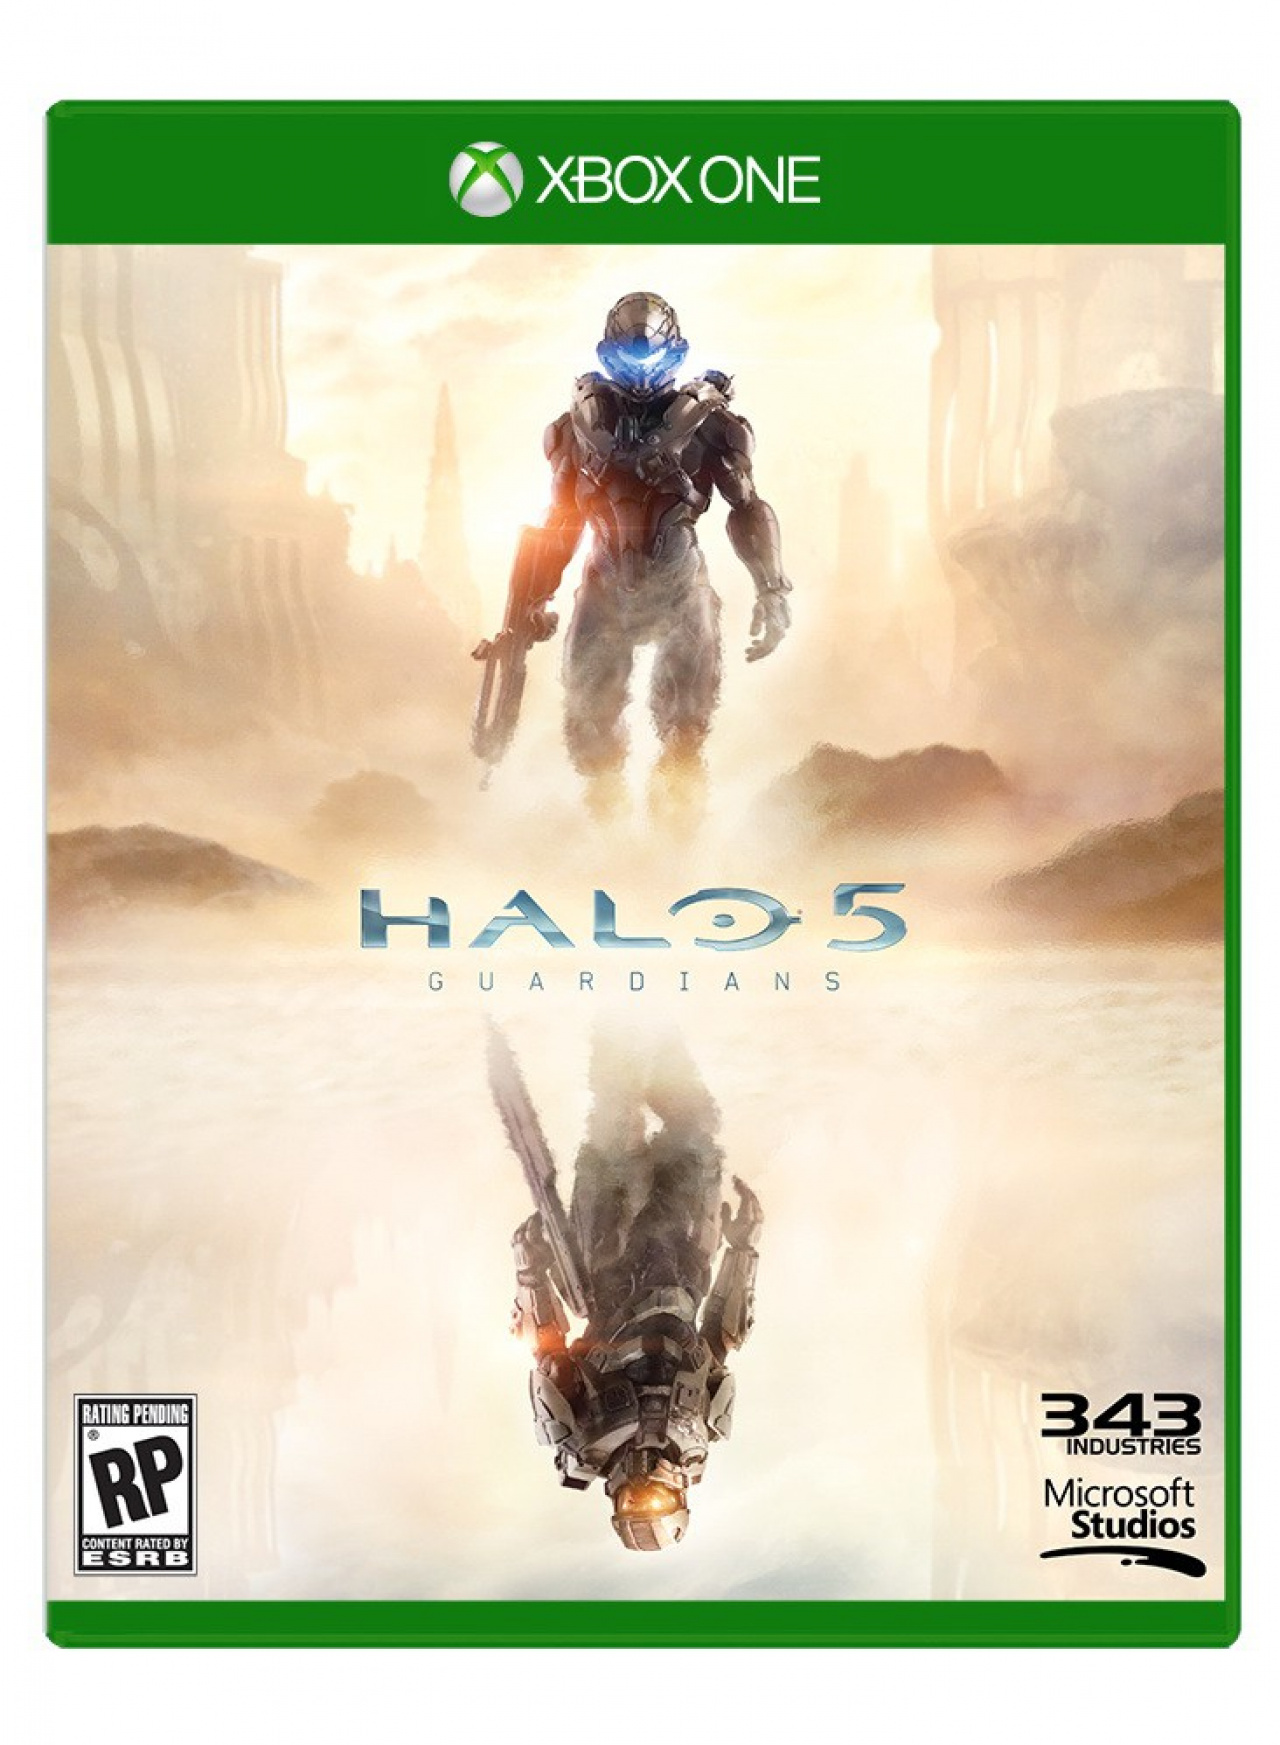 halo 5 guardians free download for pc